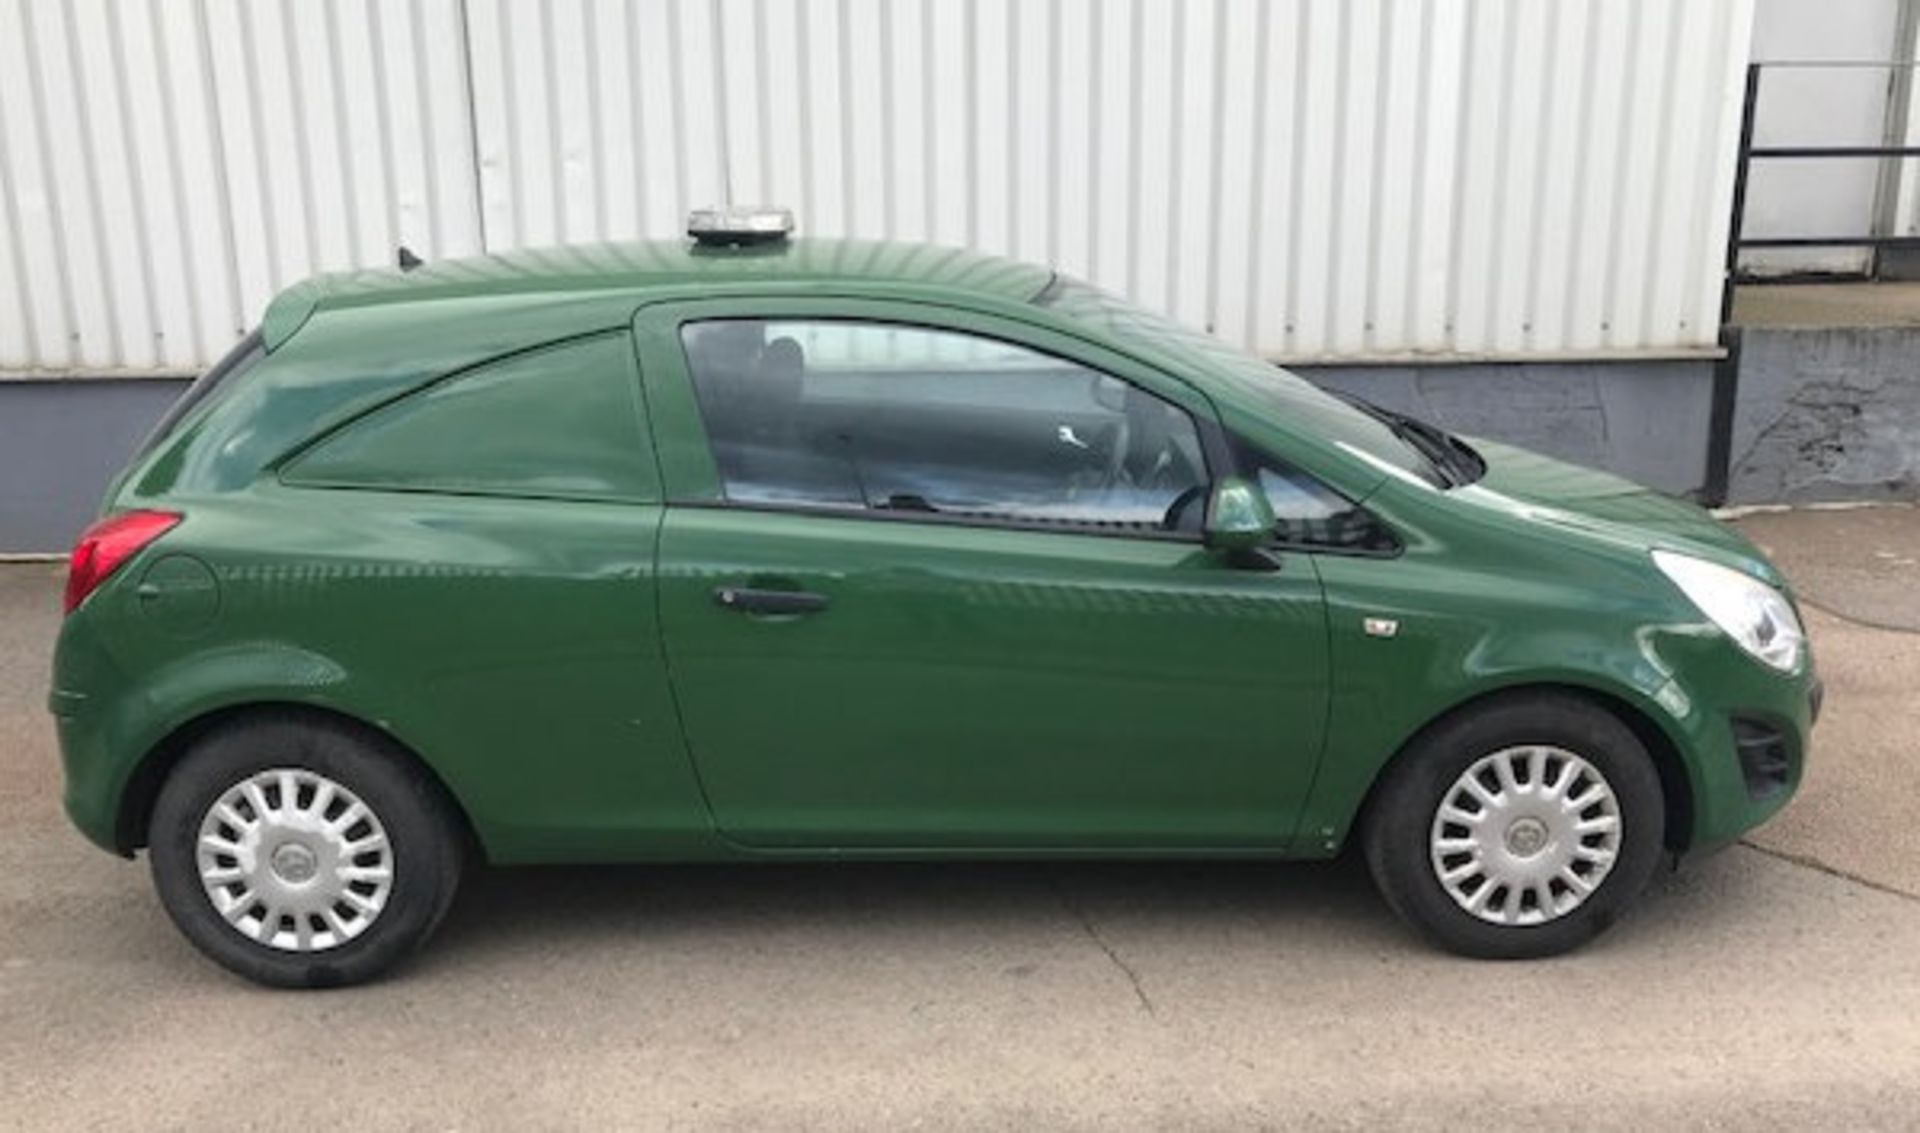 2012 Vauxhall Corsa 1.3 CDTI 3 Dr Panel Van- CL505 - Location: Corby, Northamptonshire - Image 10 of 11